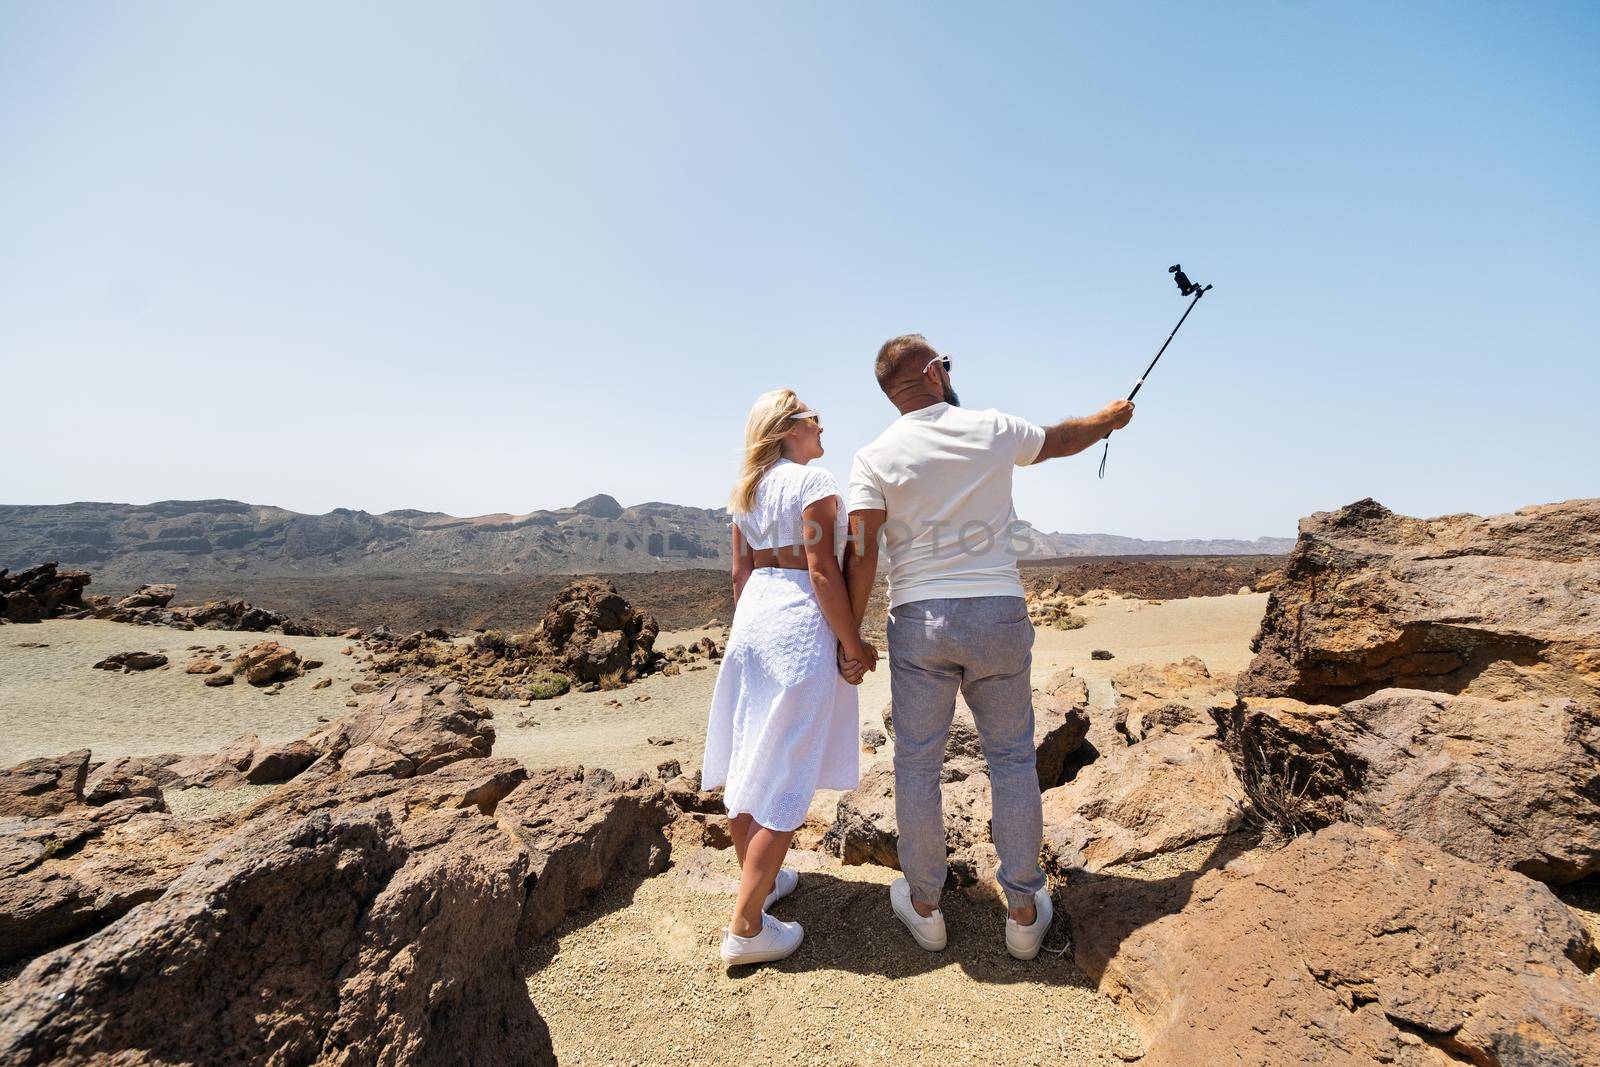 a stylish woman takes a selfie in the crater of the Teide volcano. Desert landscape in Tenerife. Teide National Park. Desert crater of the Teide volcano. Tenerife, Canary Islands by Lobachad